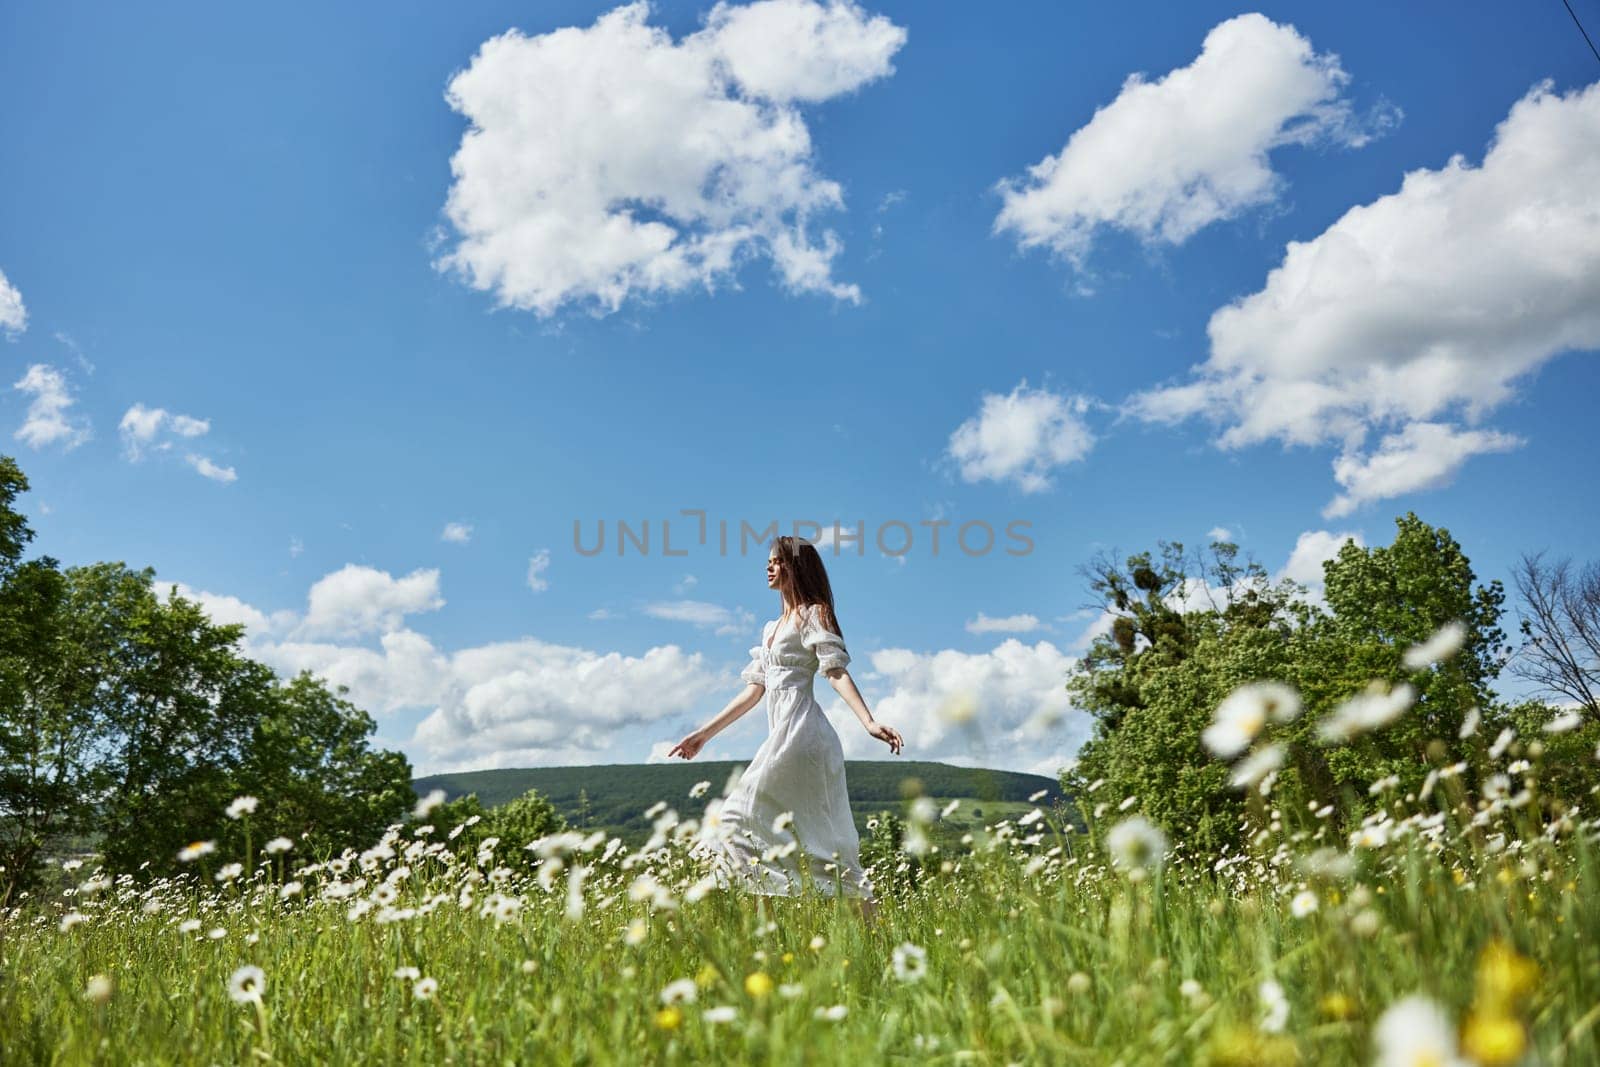 a woman in a light dress runs far across a chamomile field against a blue sky, enjoying harmony with nature. High quality photo